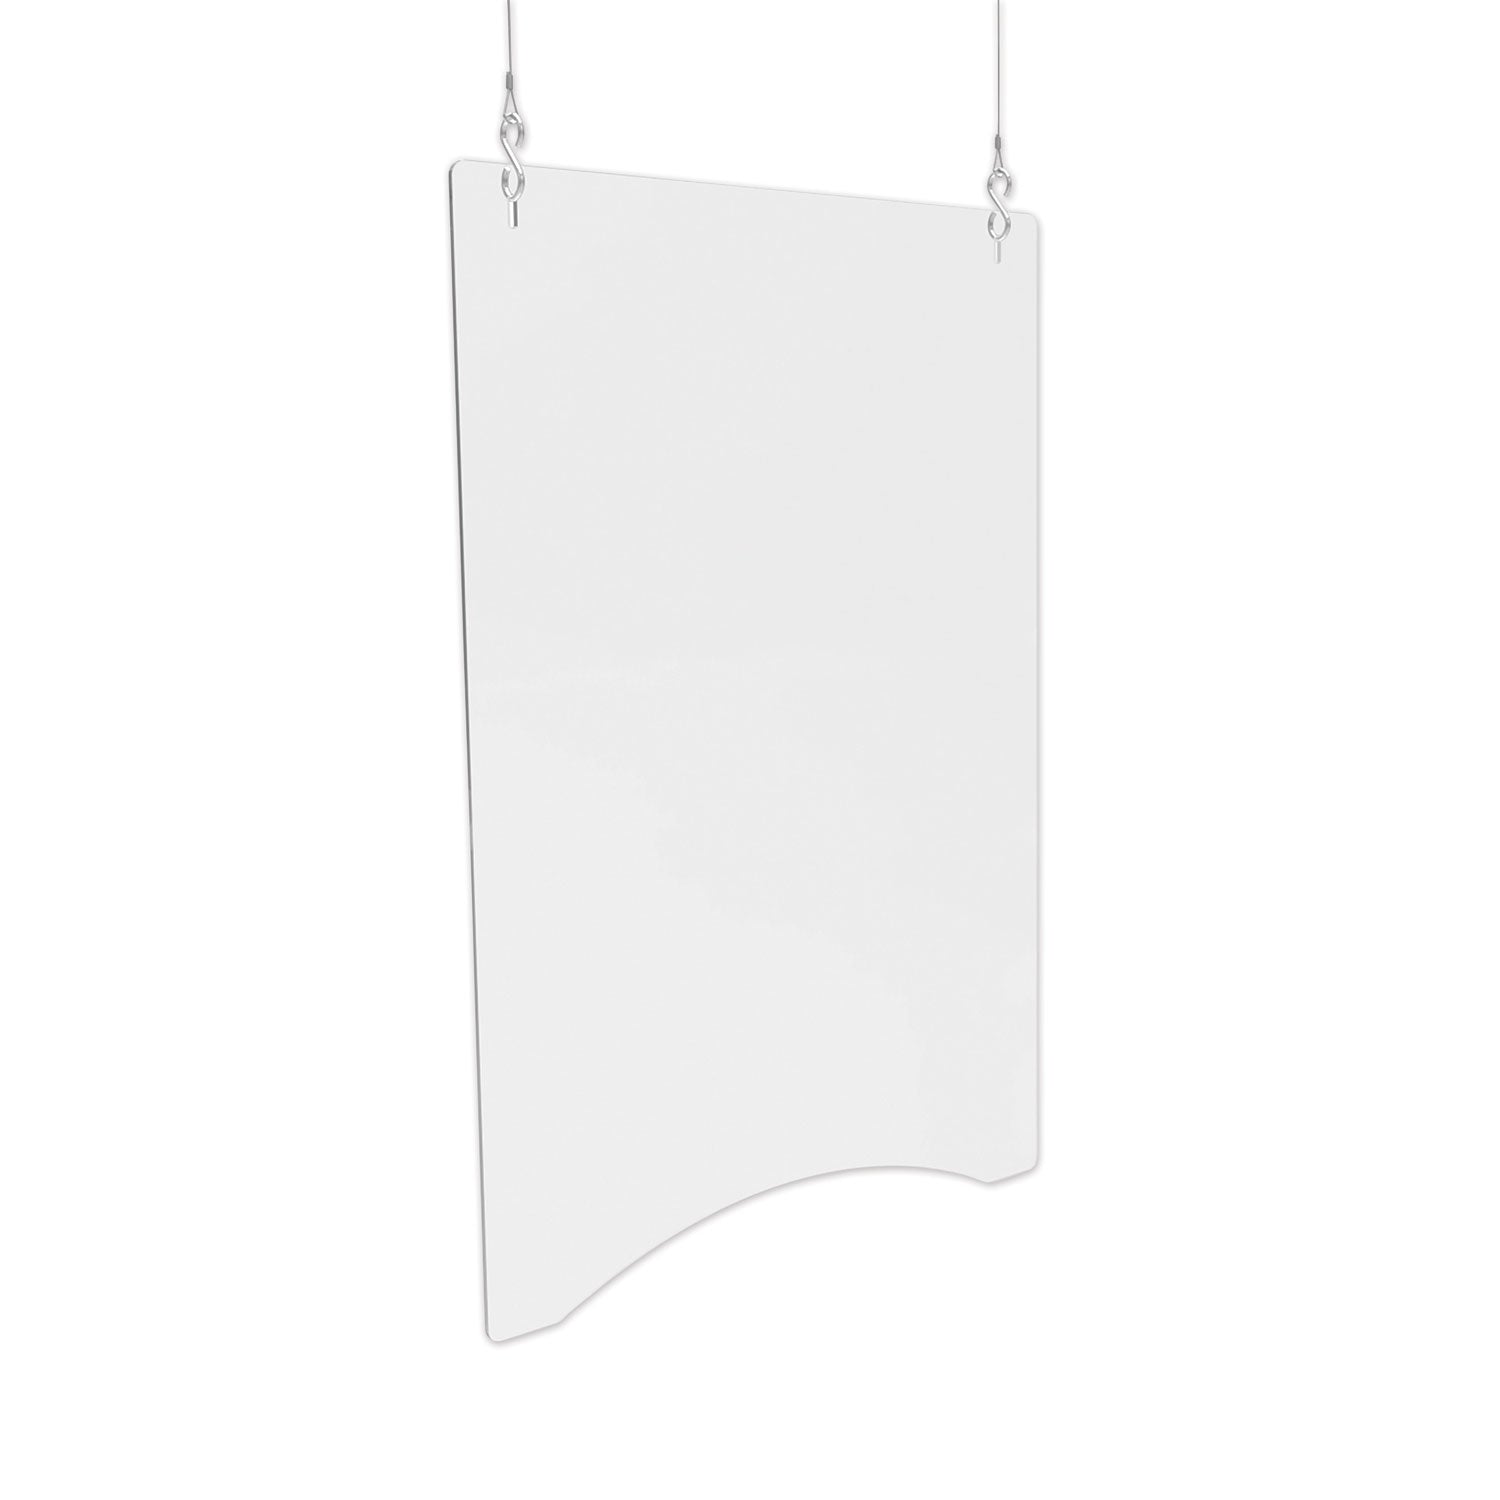 hanging-barrier-2375-x-3575-acrylic-clear-2-carton_defpbcha2436 - 1